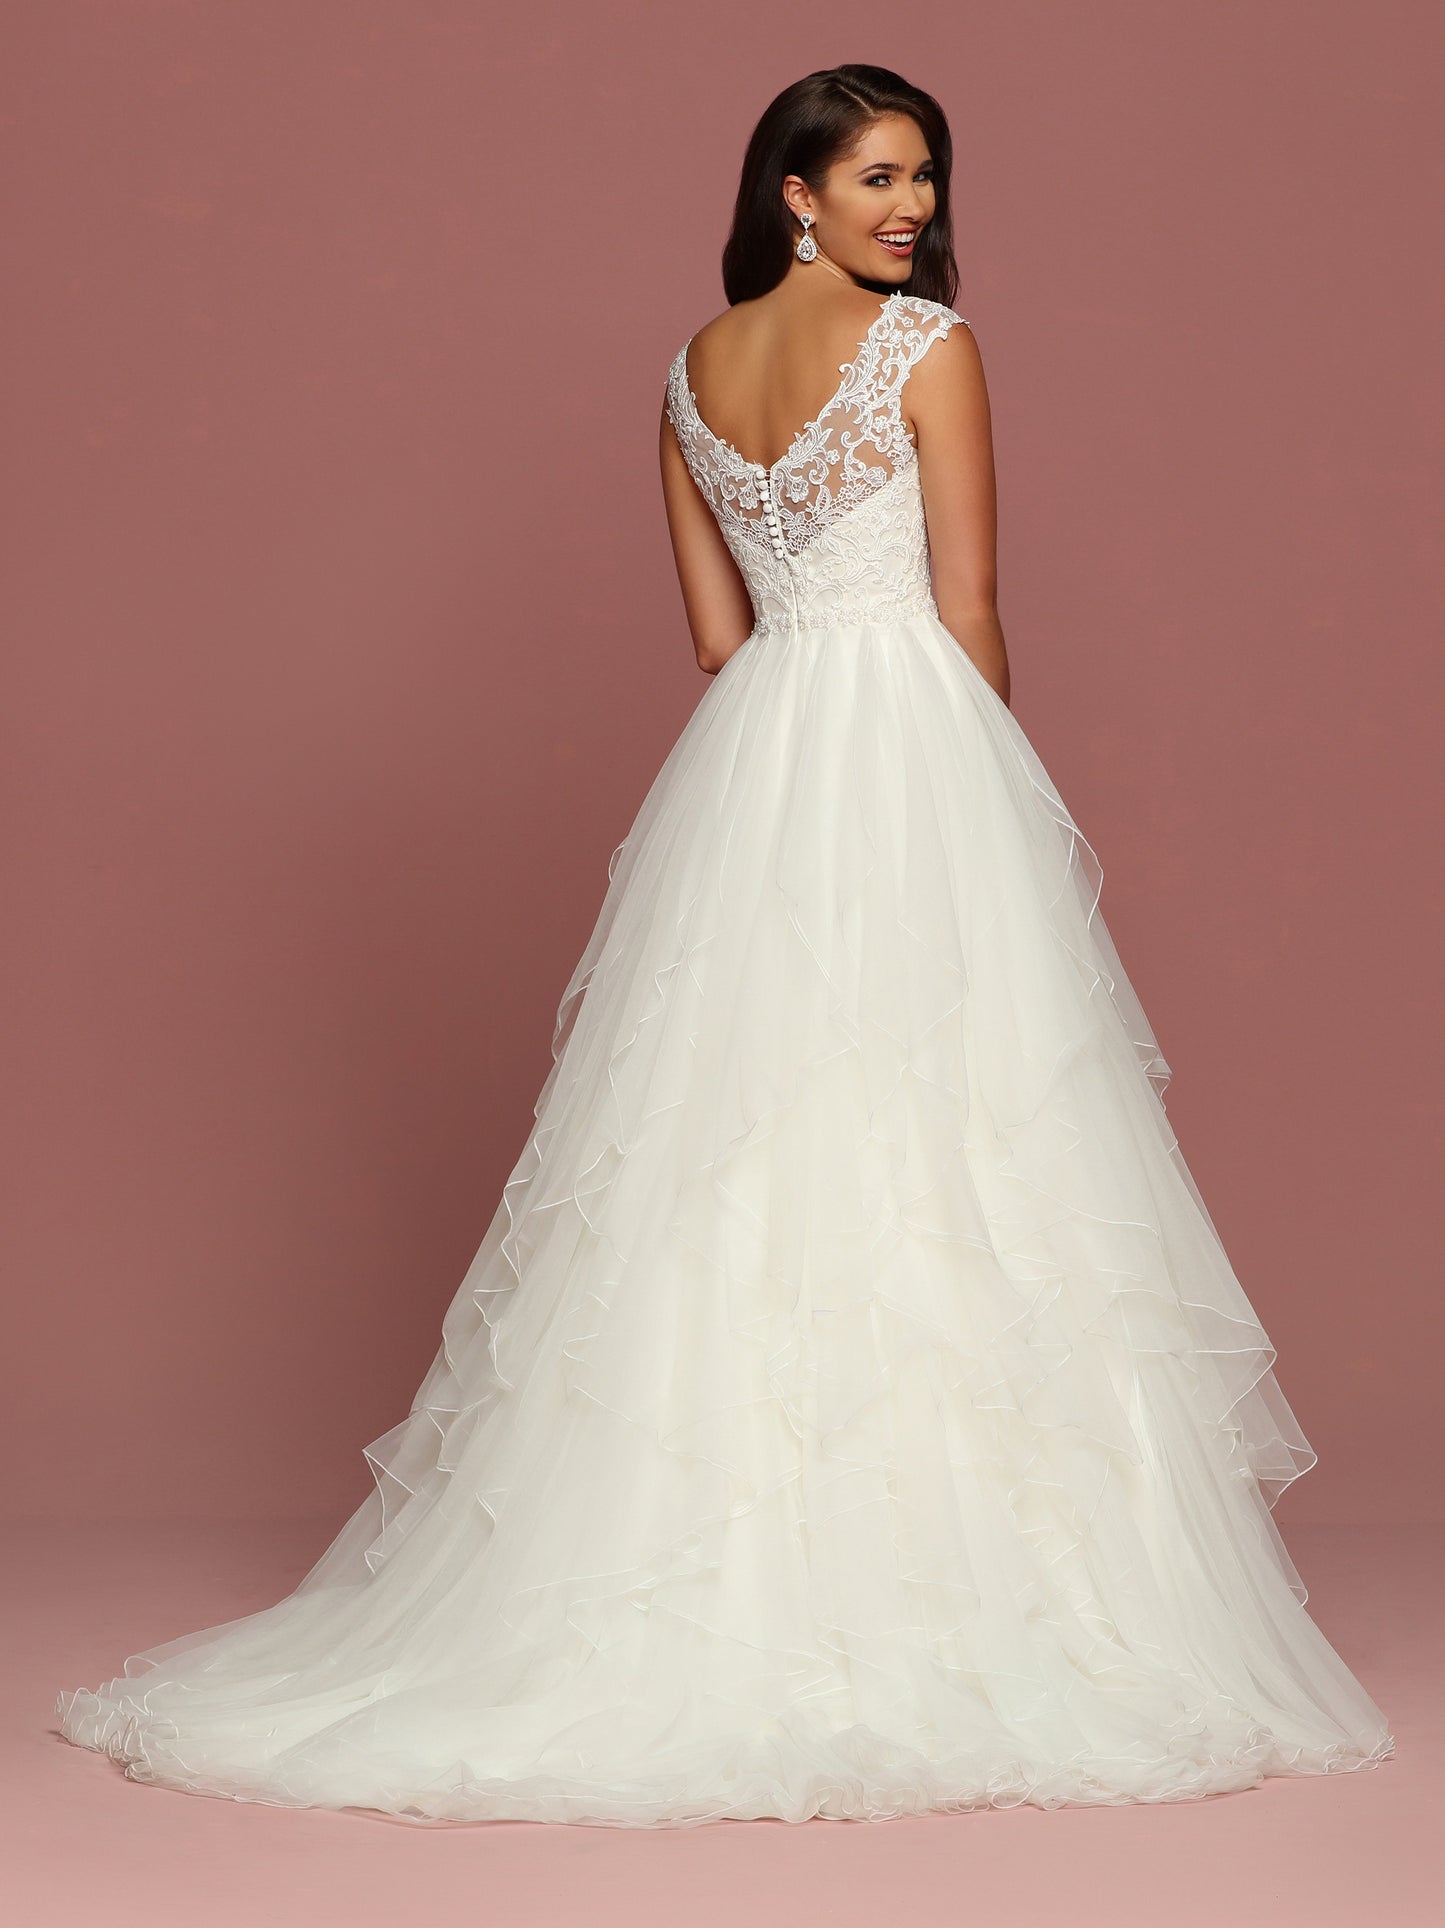 Davinci Bridal 50501 is a Stunning Ruffle layer Tulle ballgown. This Sheer Lace Illusion neckline has an underlying sweetheart neckline. sheer lace illusion open back. Embellished Crystal Bridal Waist belt.   Available for 1-2 Week Delivery!!!  Available Sizes: 2,4,6,8,10,12,14,16,18,20  Available Colors: Ivory